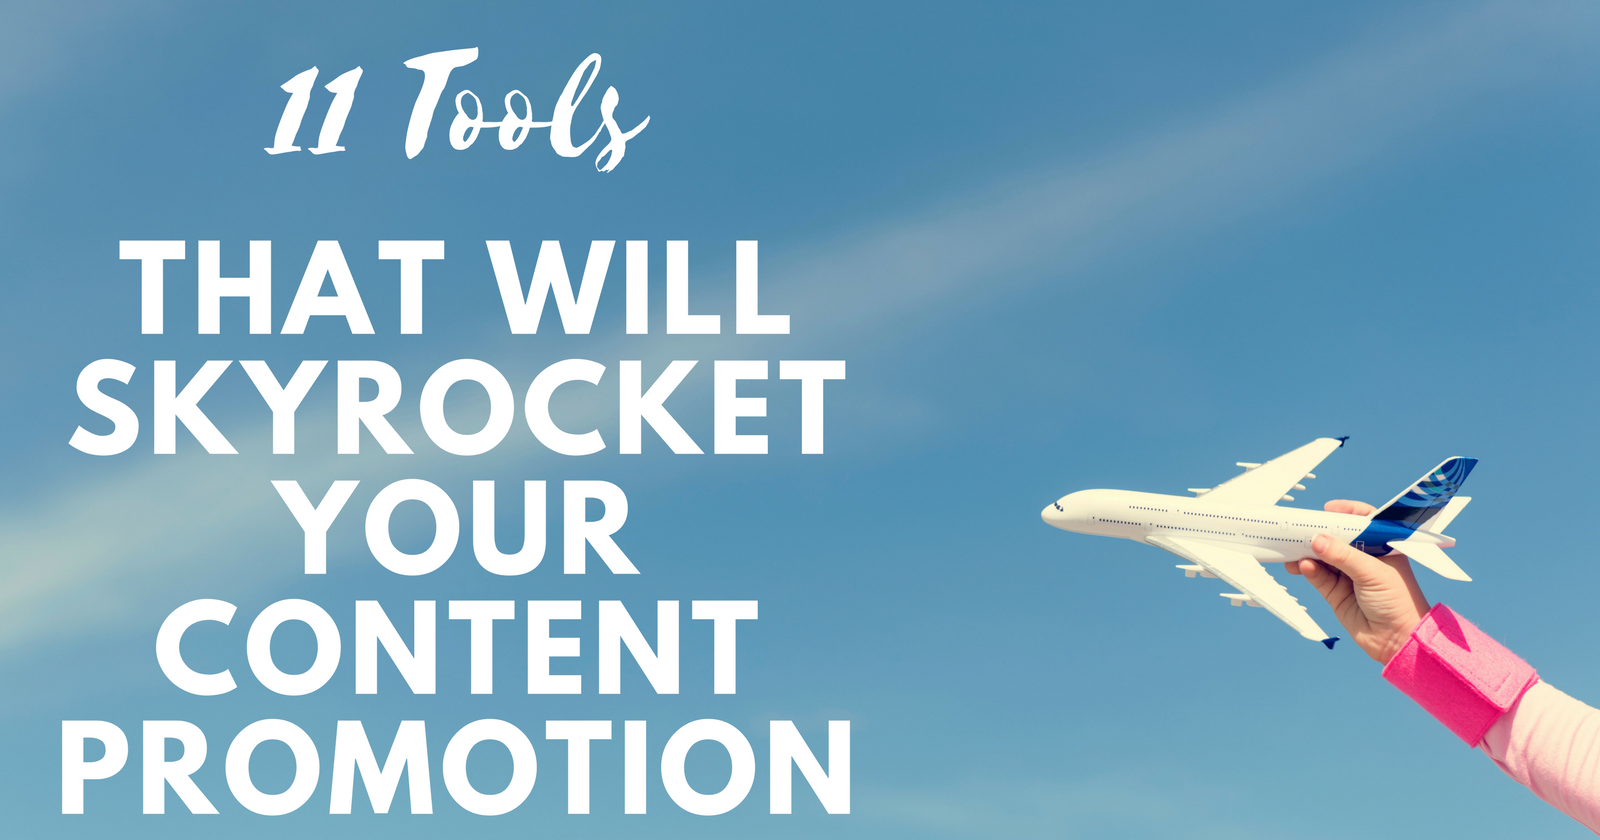 11-tools-that-will-skyrocket-your-content-promotion.png